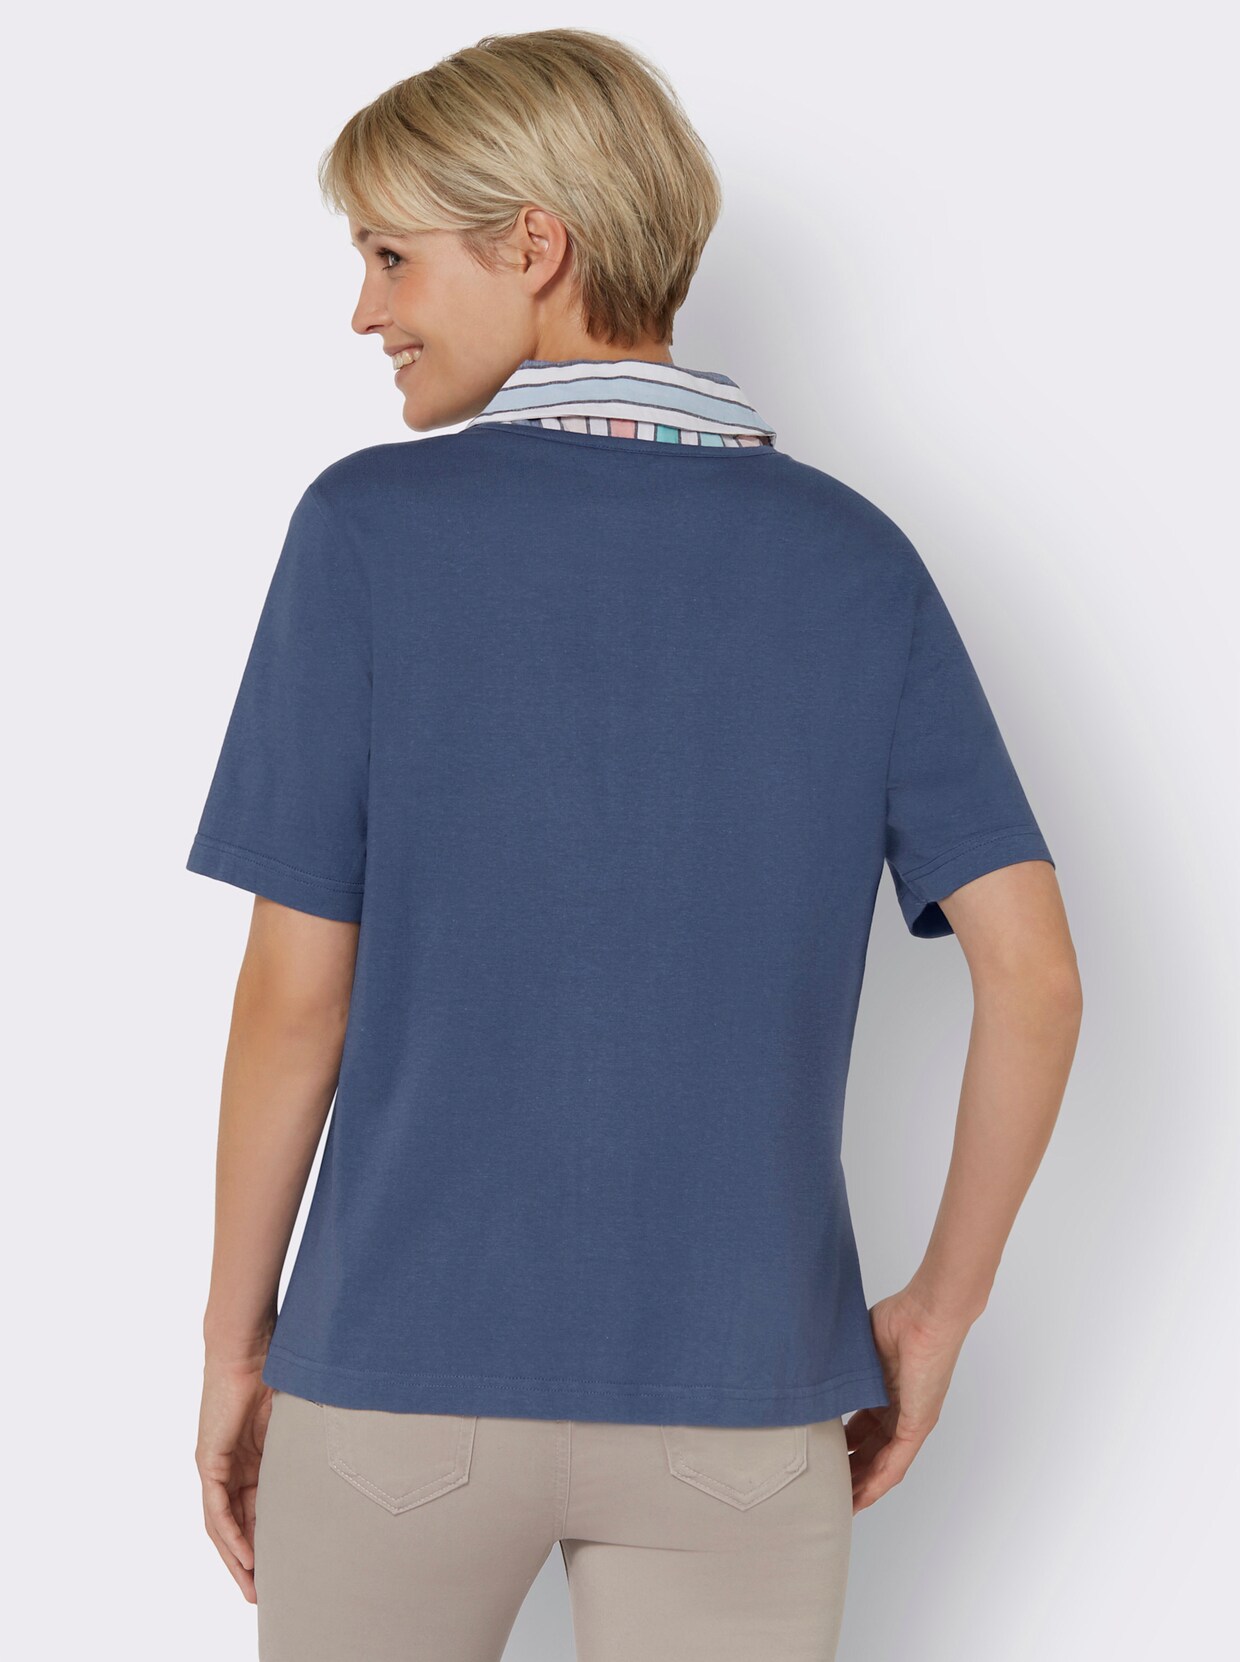 2-in-1-shirt - jeansblauw